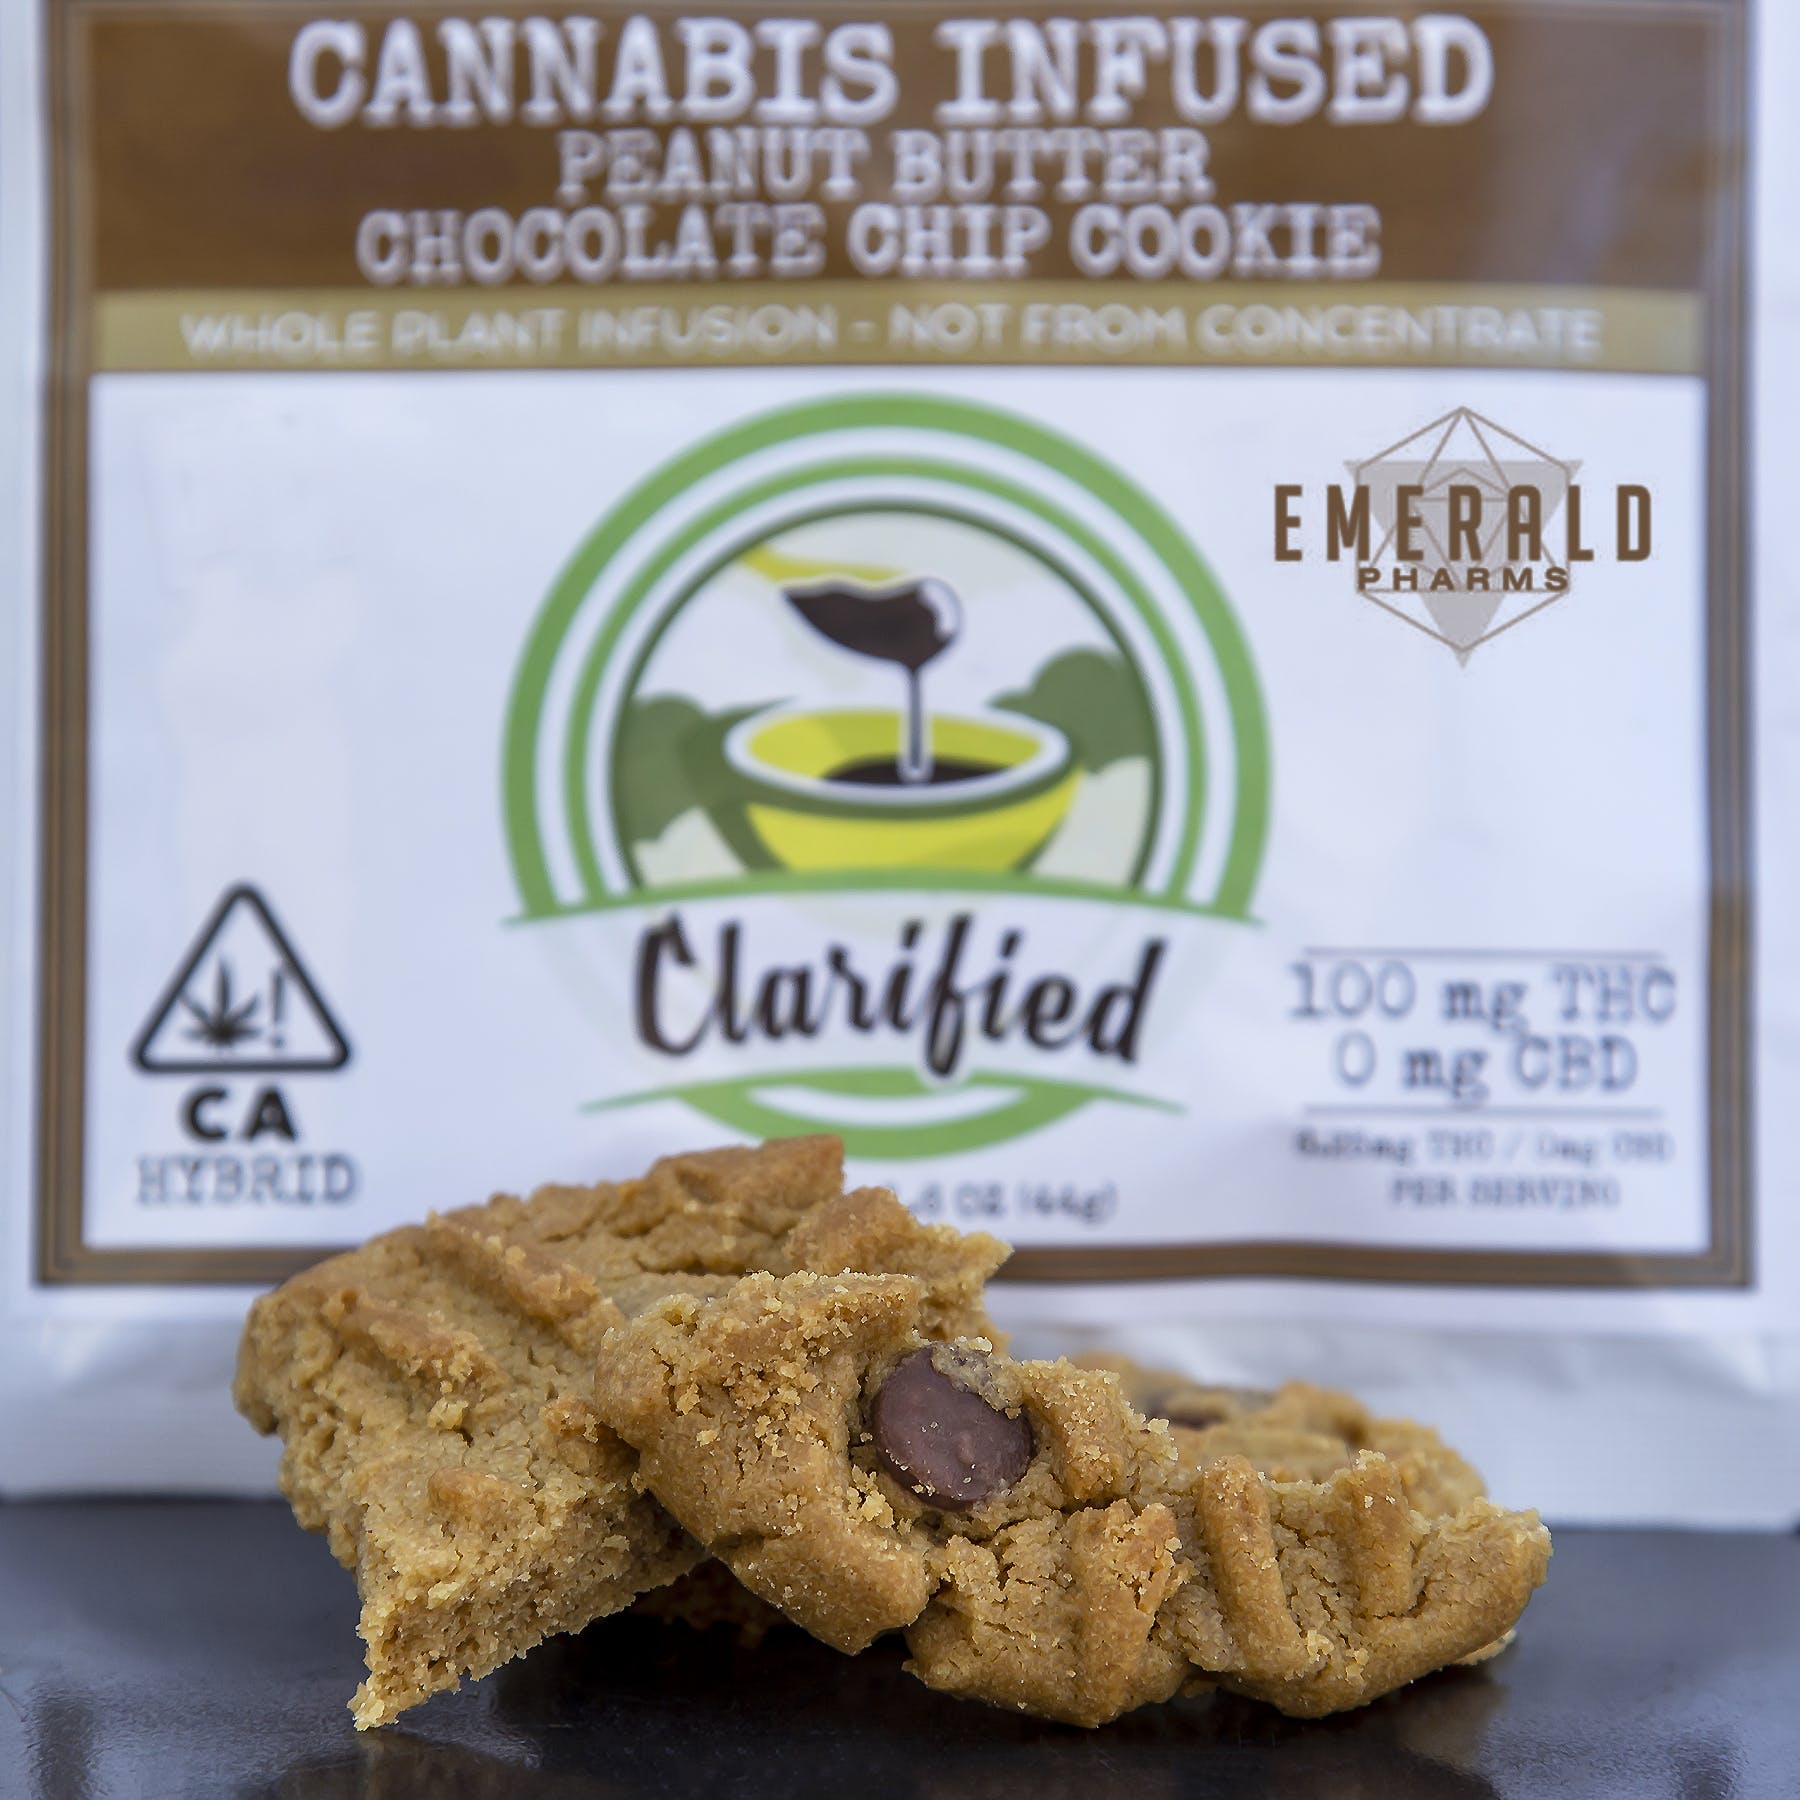 Peanut Butter Choc. Chip Cookie by Clarified